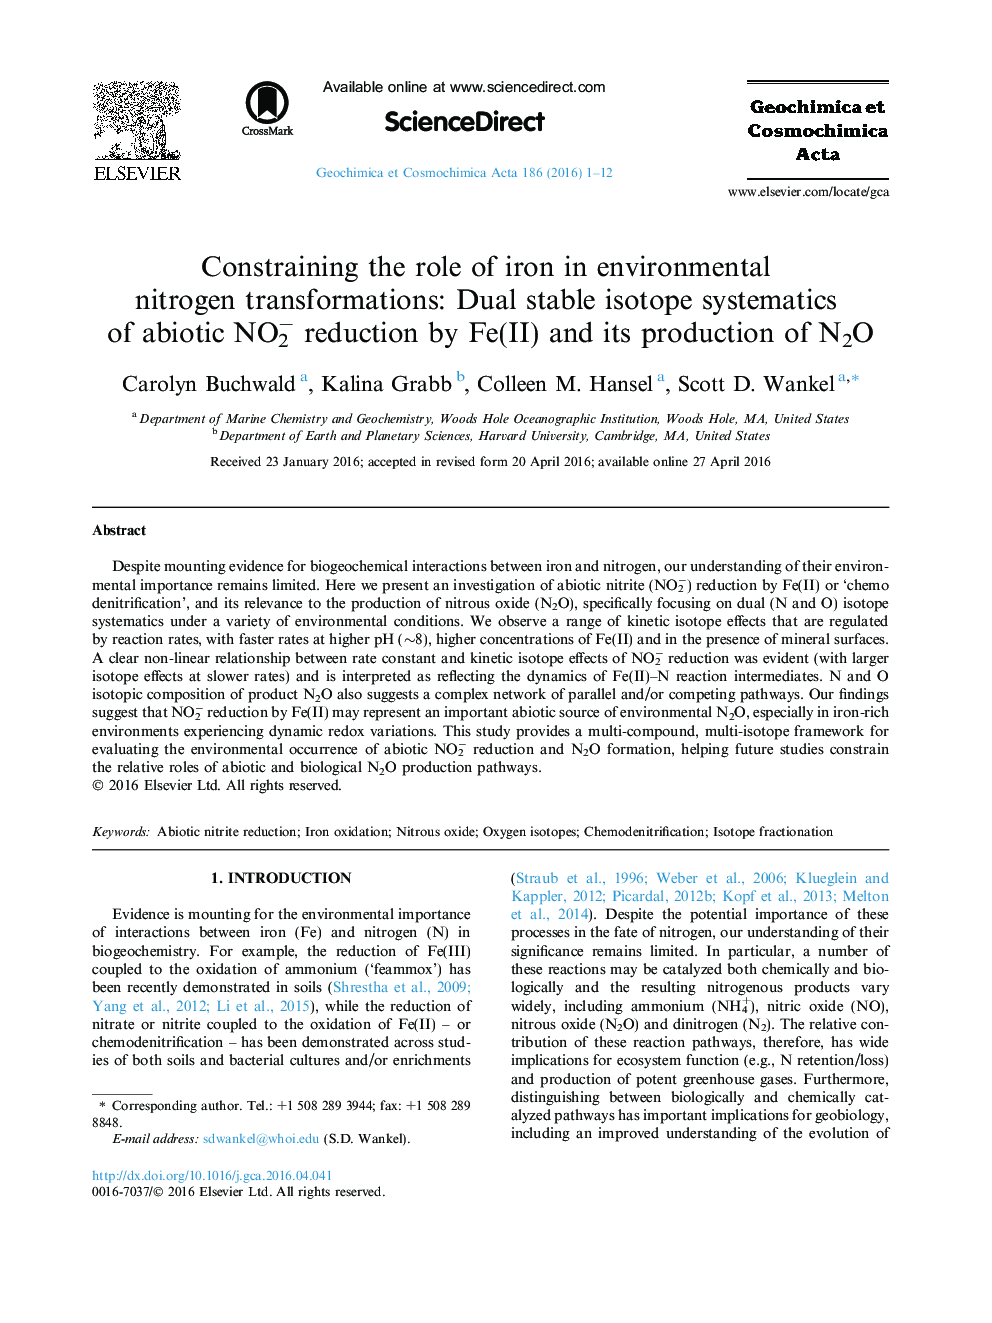 Constraining the role of iron in environmental nitrogen transformations: Dual stable isotope systematics of abiotic NO2â reduction by Fe(II) and its production of N2O